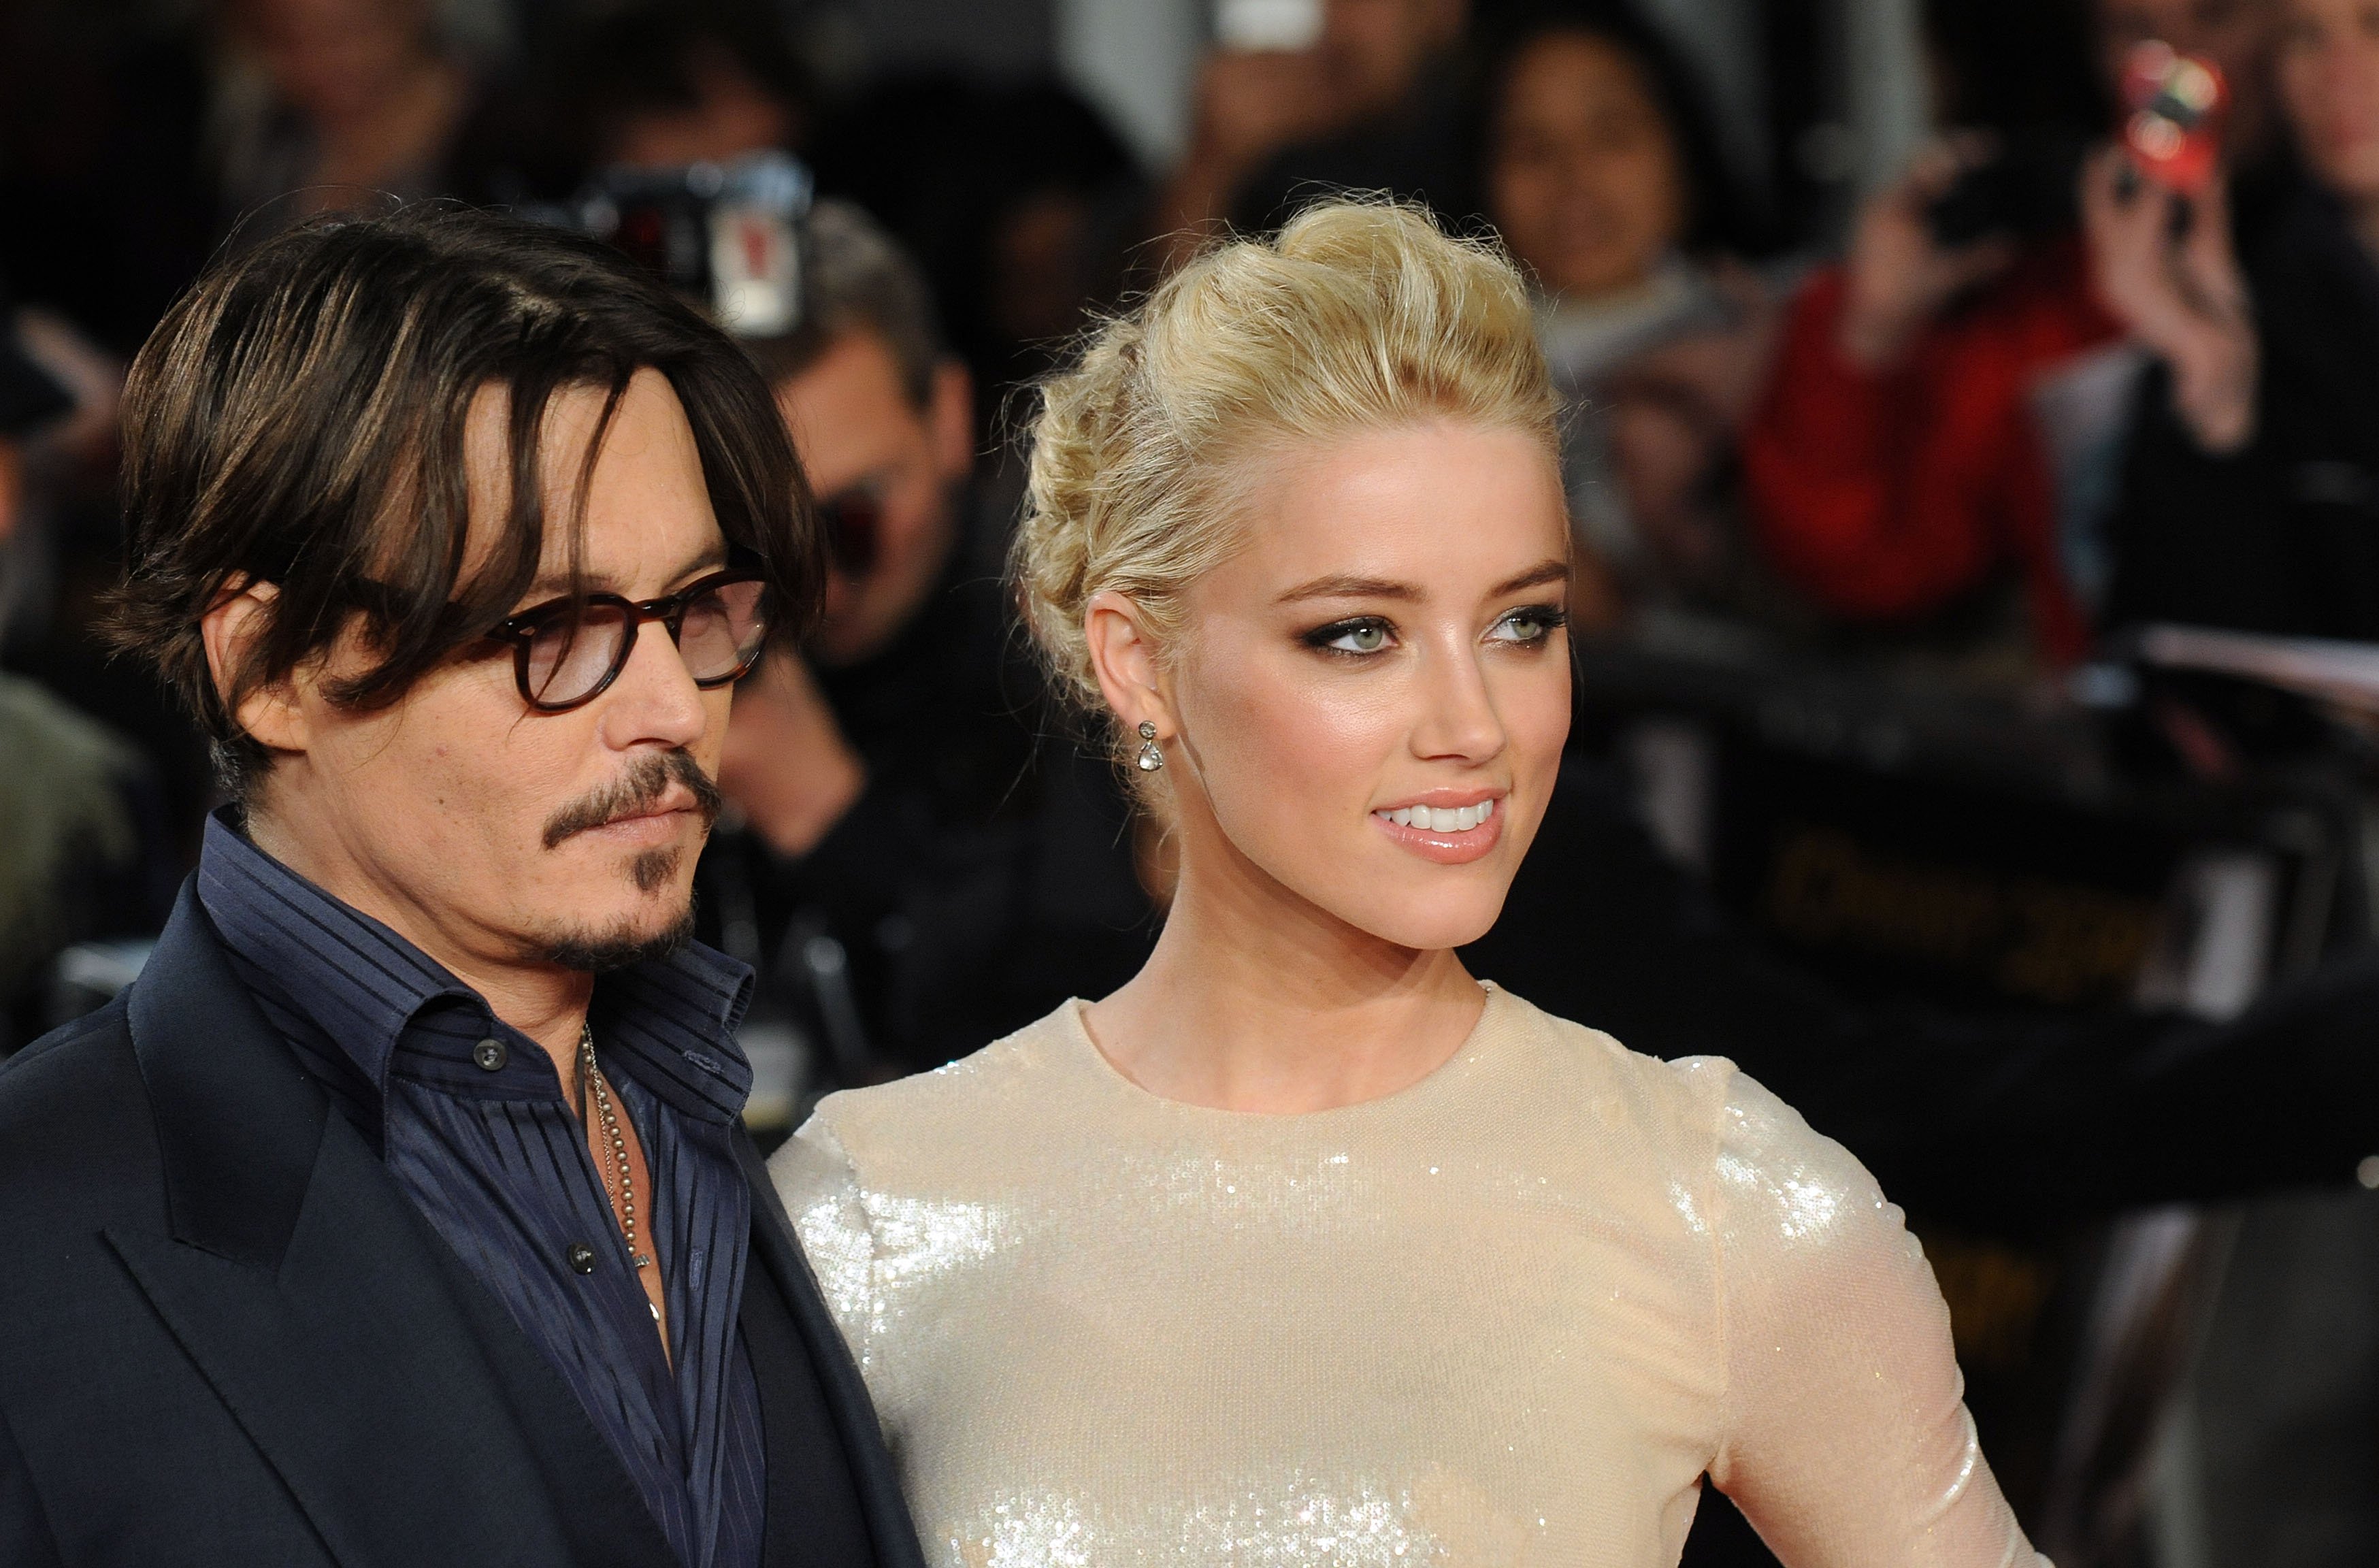 Johnny Depp and Amber Heard at the UK premiere of "The Rum Diary" on November 3, 2011 | Source: Getty Images